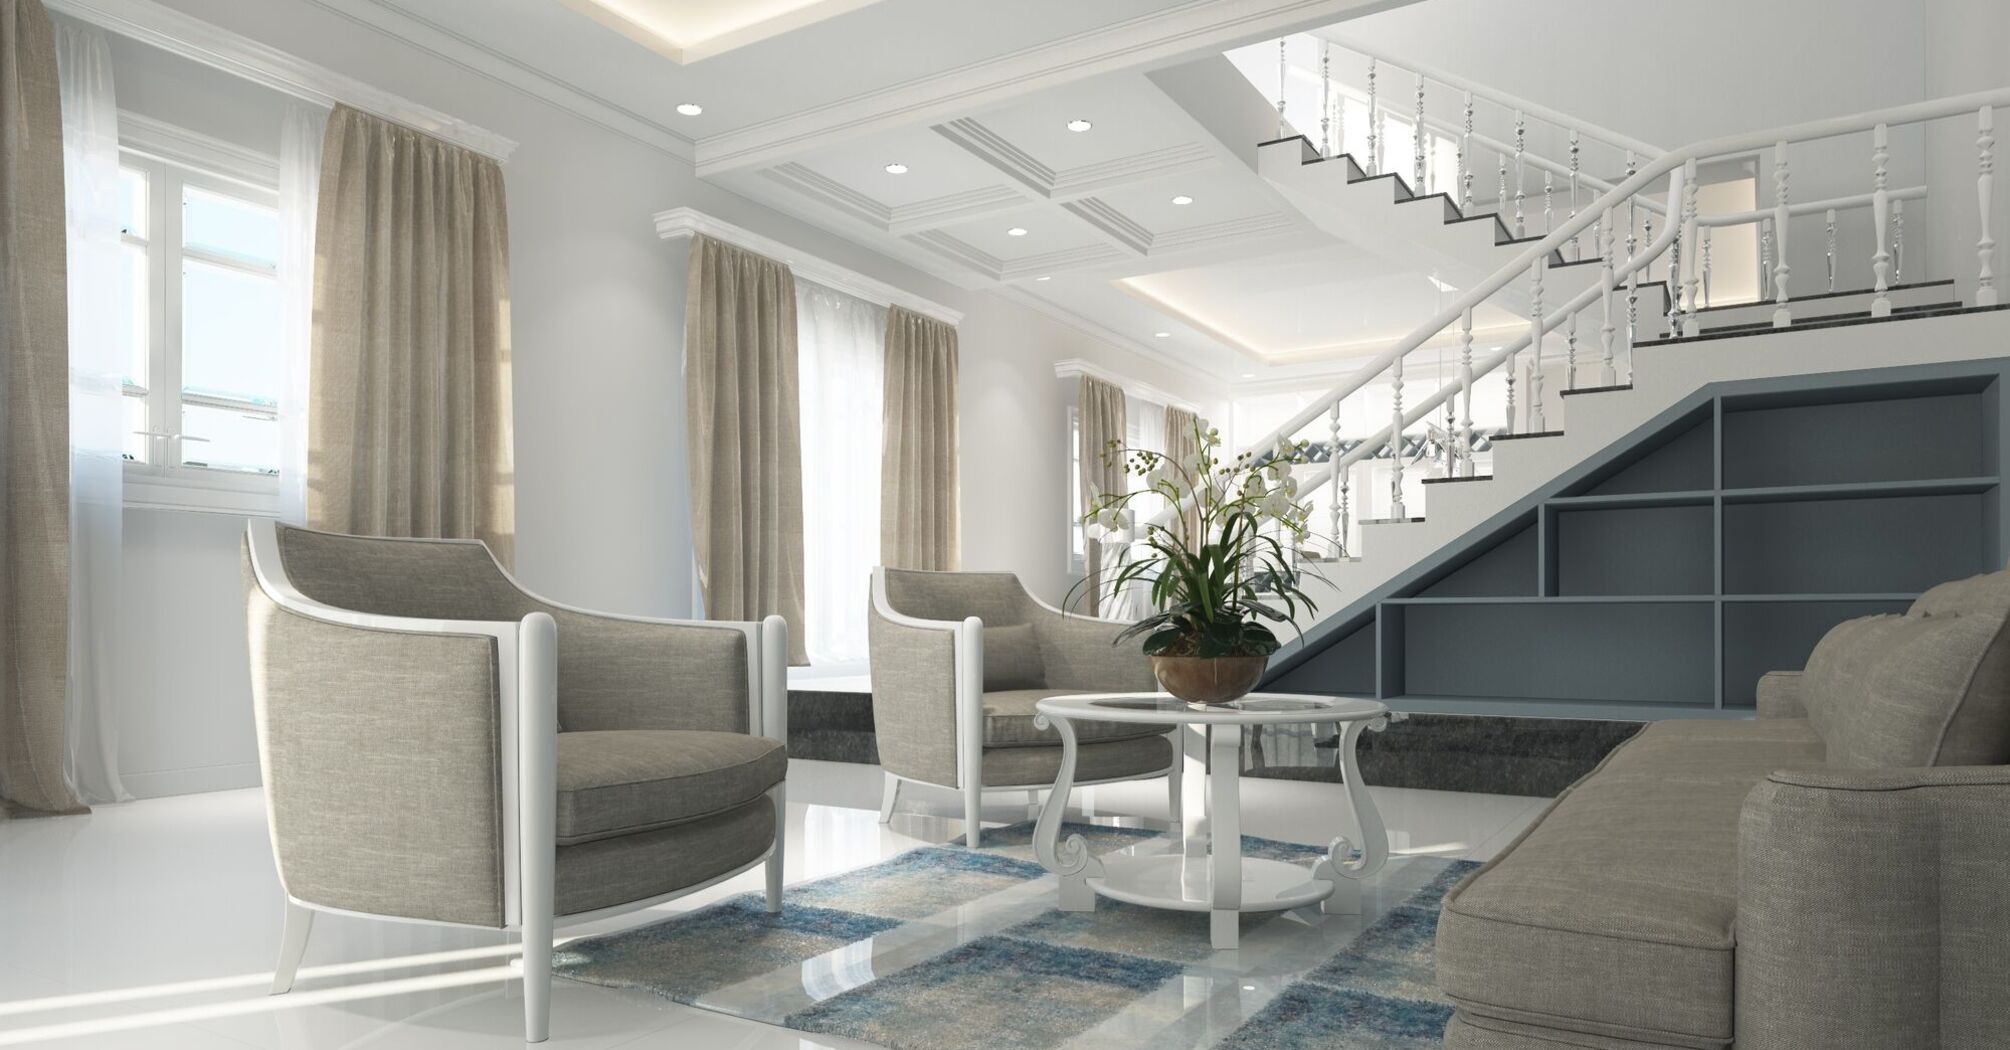 Modern living room interior with a staircase, gray armchairs, a white coffee table, and a sectional sofa in a bright, spacious setting